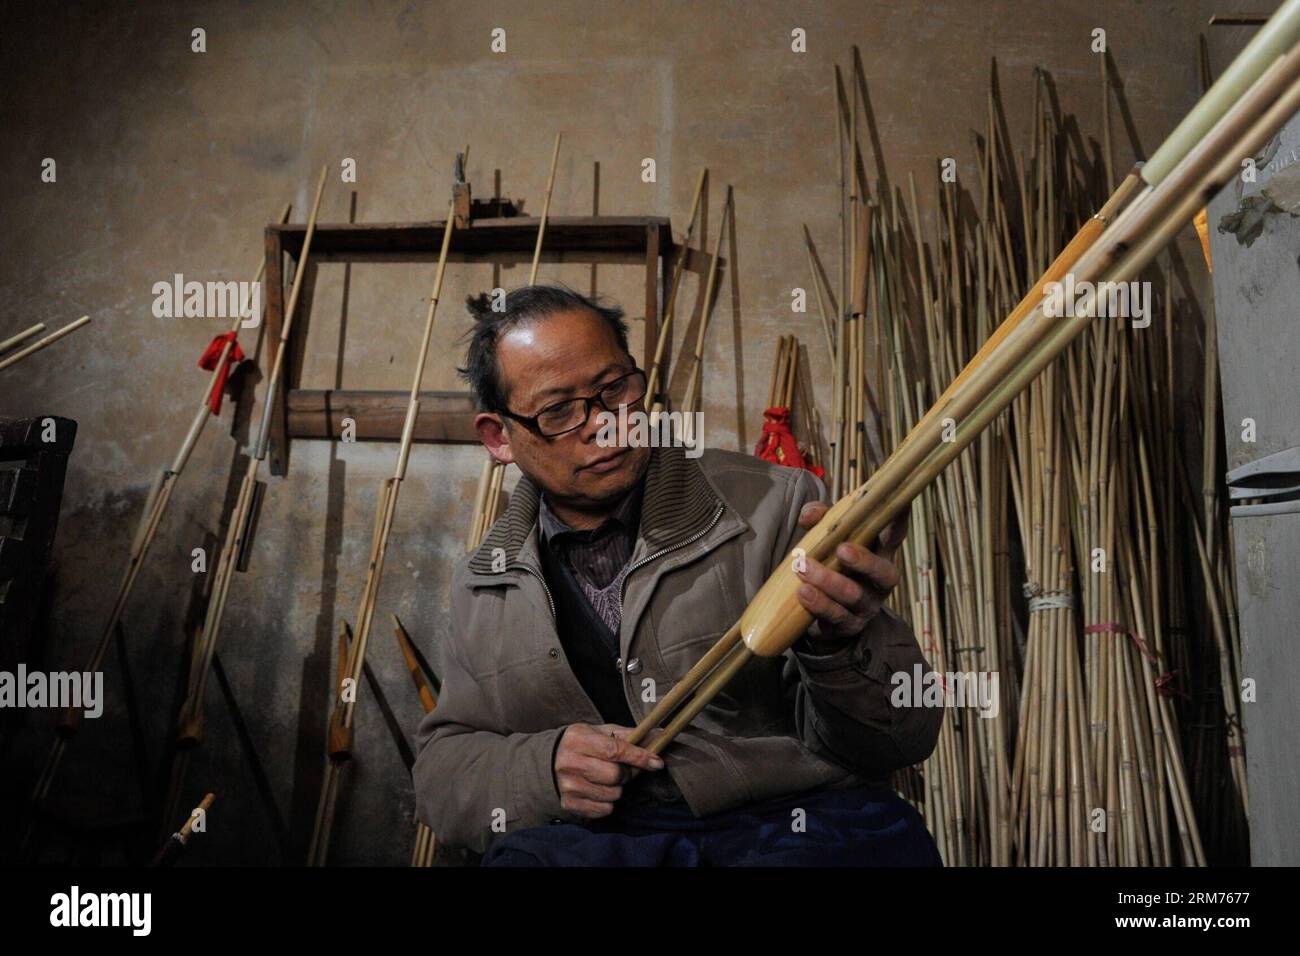 (140215) -- KAILI, Feb. 15, 2014 (Xinhua) -- Craftsman Pan Rouda makes Lusheng, a kind of reed-pipe wind instrument, in Xin guang Village, Zhouxi Township, Qiandongnan Miao and Dong Autonomous Prefecture of southwest China s Guizhou Province, Feb. 15, 2014. Dubbed as the home of Lusheng , Xin guang has the tradition of making the wind instrument for some 400 years with 65 family workshops still making it at present. In the year of 2006, China listed the craft as the national intangible cultural heritage. (Xinhua/Ou Dongqu) (hdt) CHINA-GUIZHOU-LUSHENG (CN) PUBLICATIONxNOTxINxCHN   Kaili Feb 15 Stock Photo